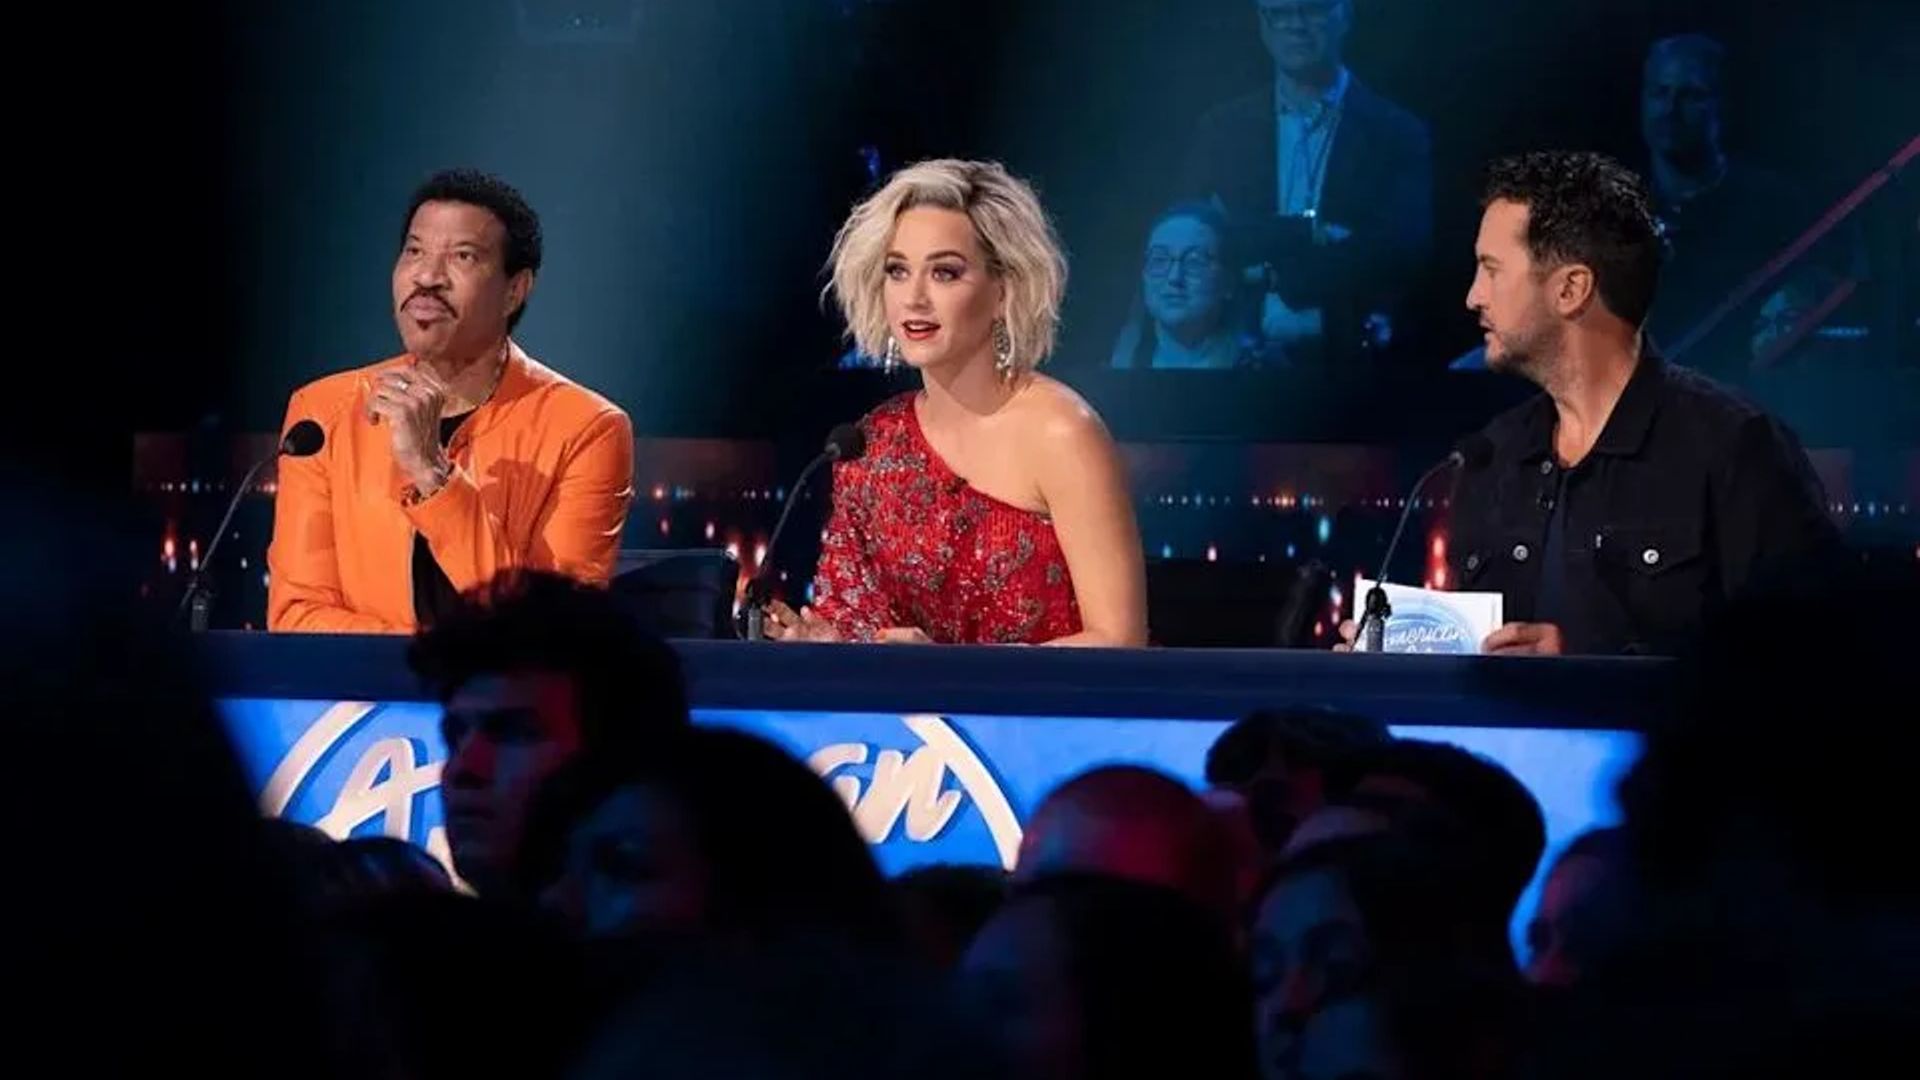 American Idol’s Katy Perry and Lionel Richie 'big time' replacements revealed - can you guess who?